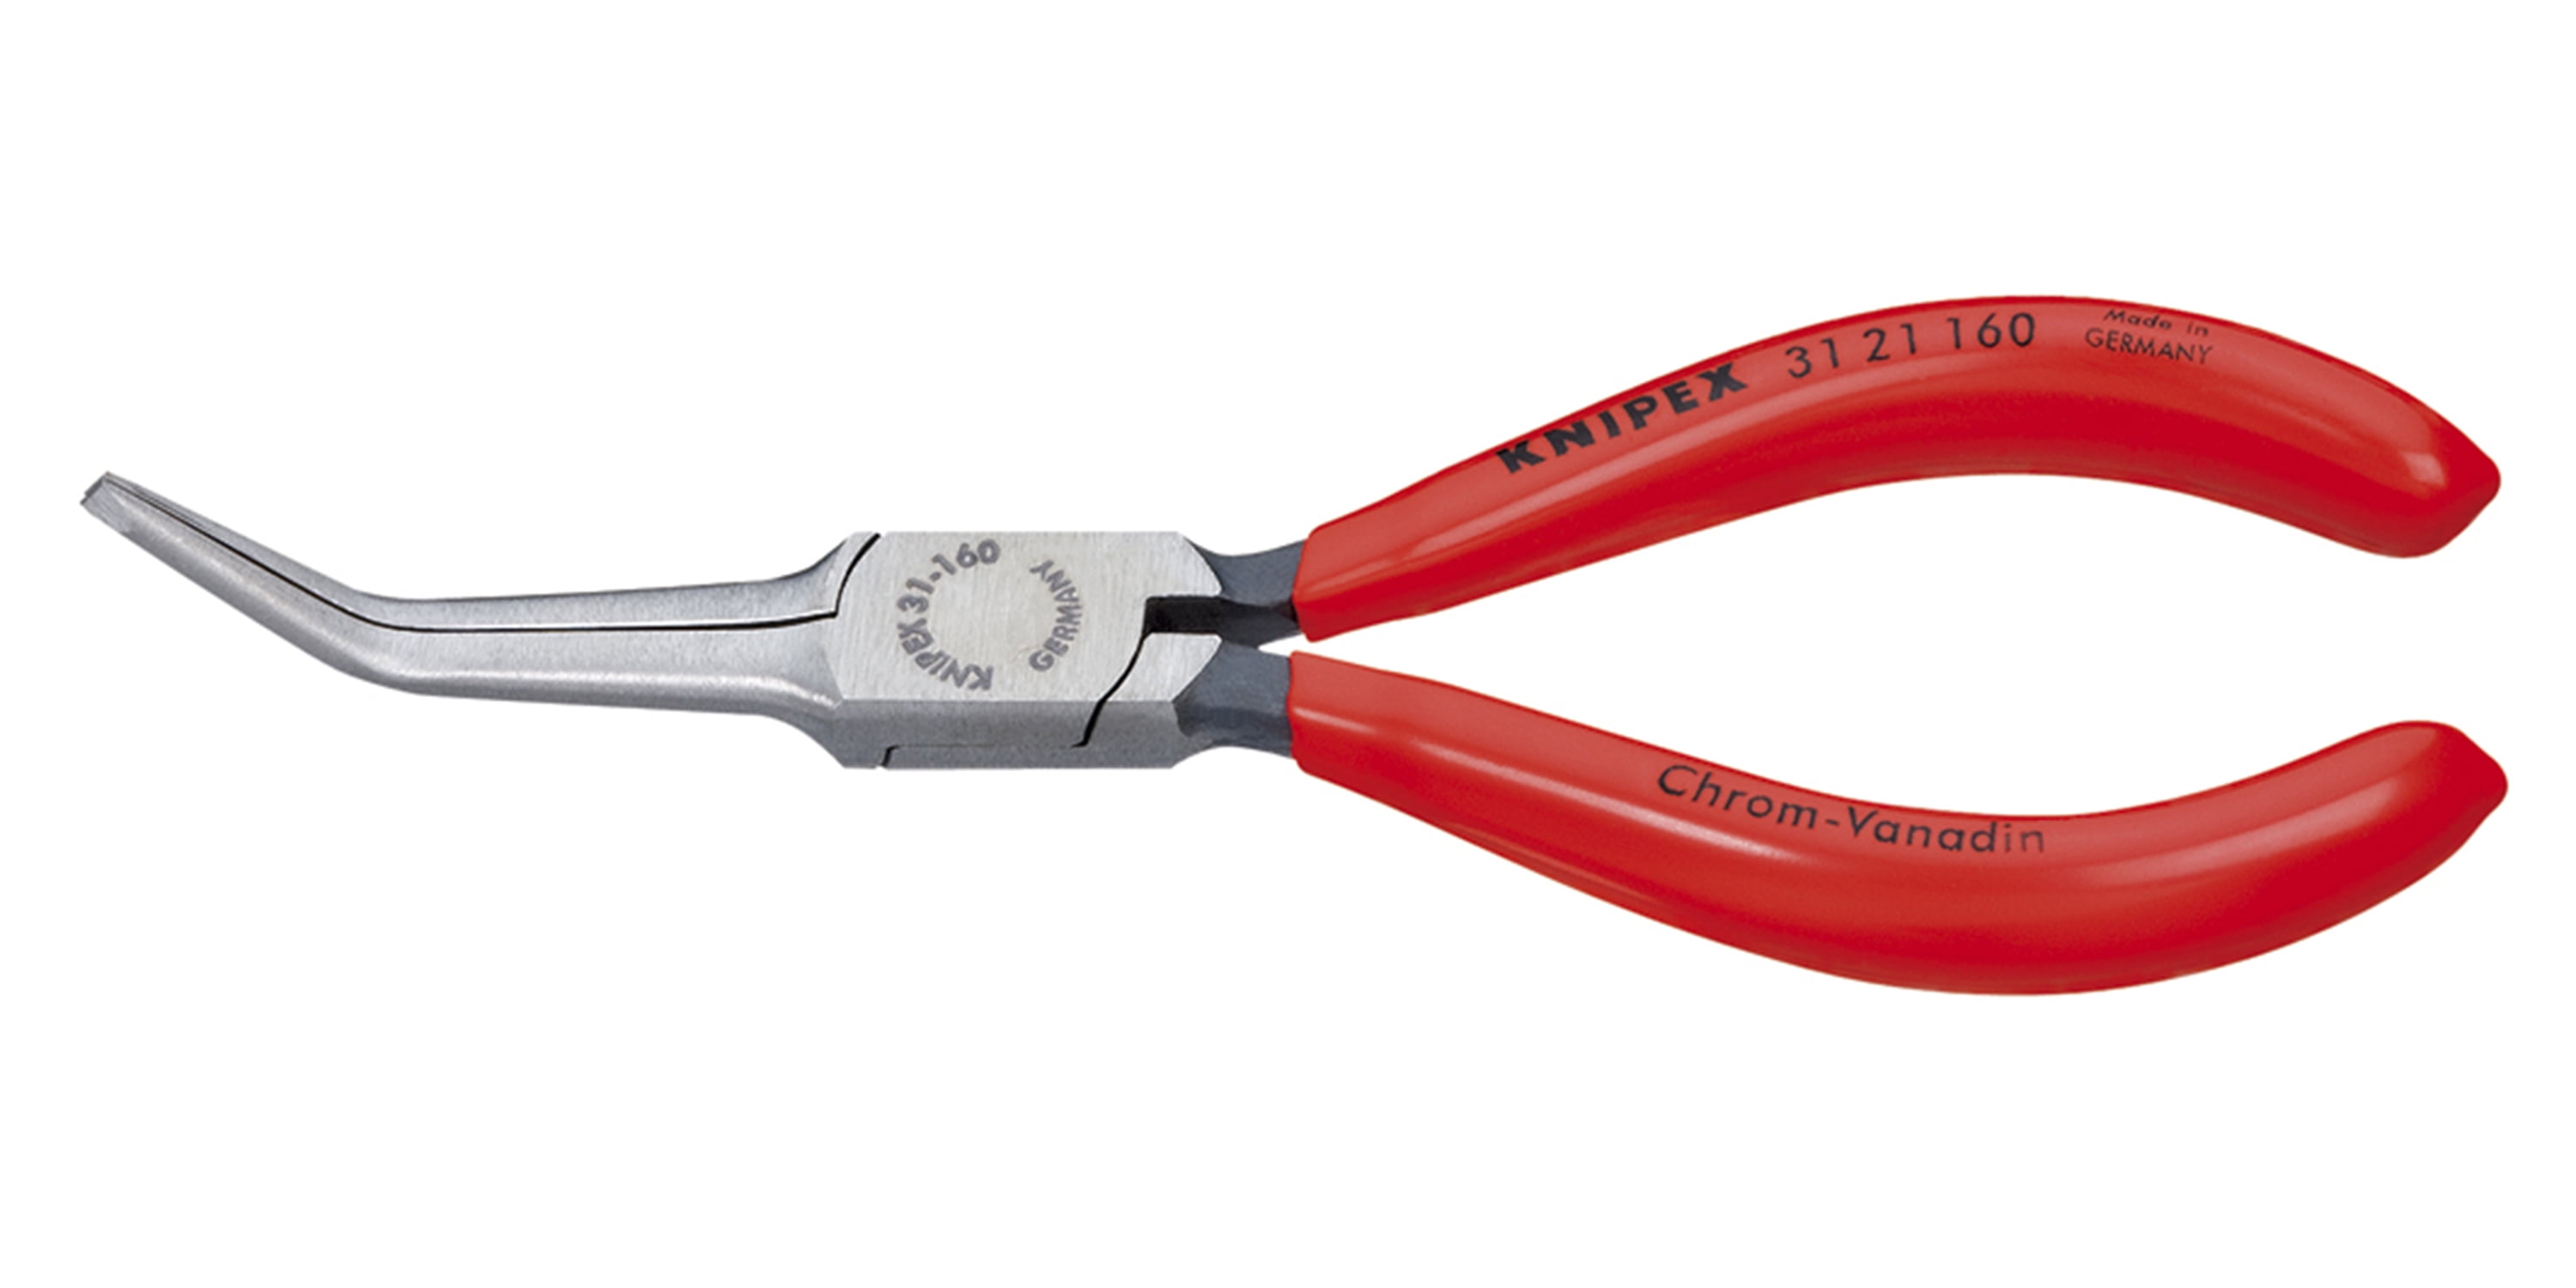 underholdning skraber andrageren KNIPEX Tools 31 21 160, 6.25 Inch Angled Needle Nose Pliers - Walmart.com